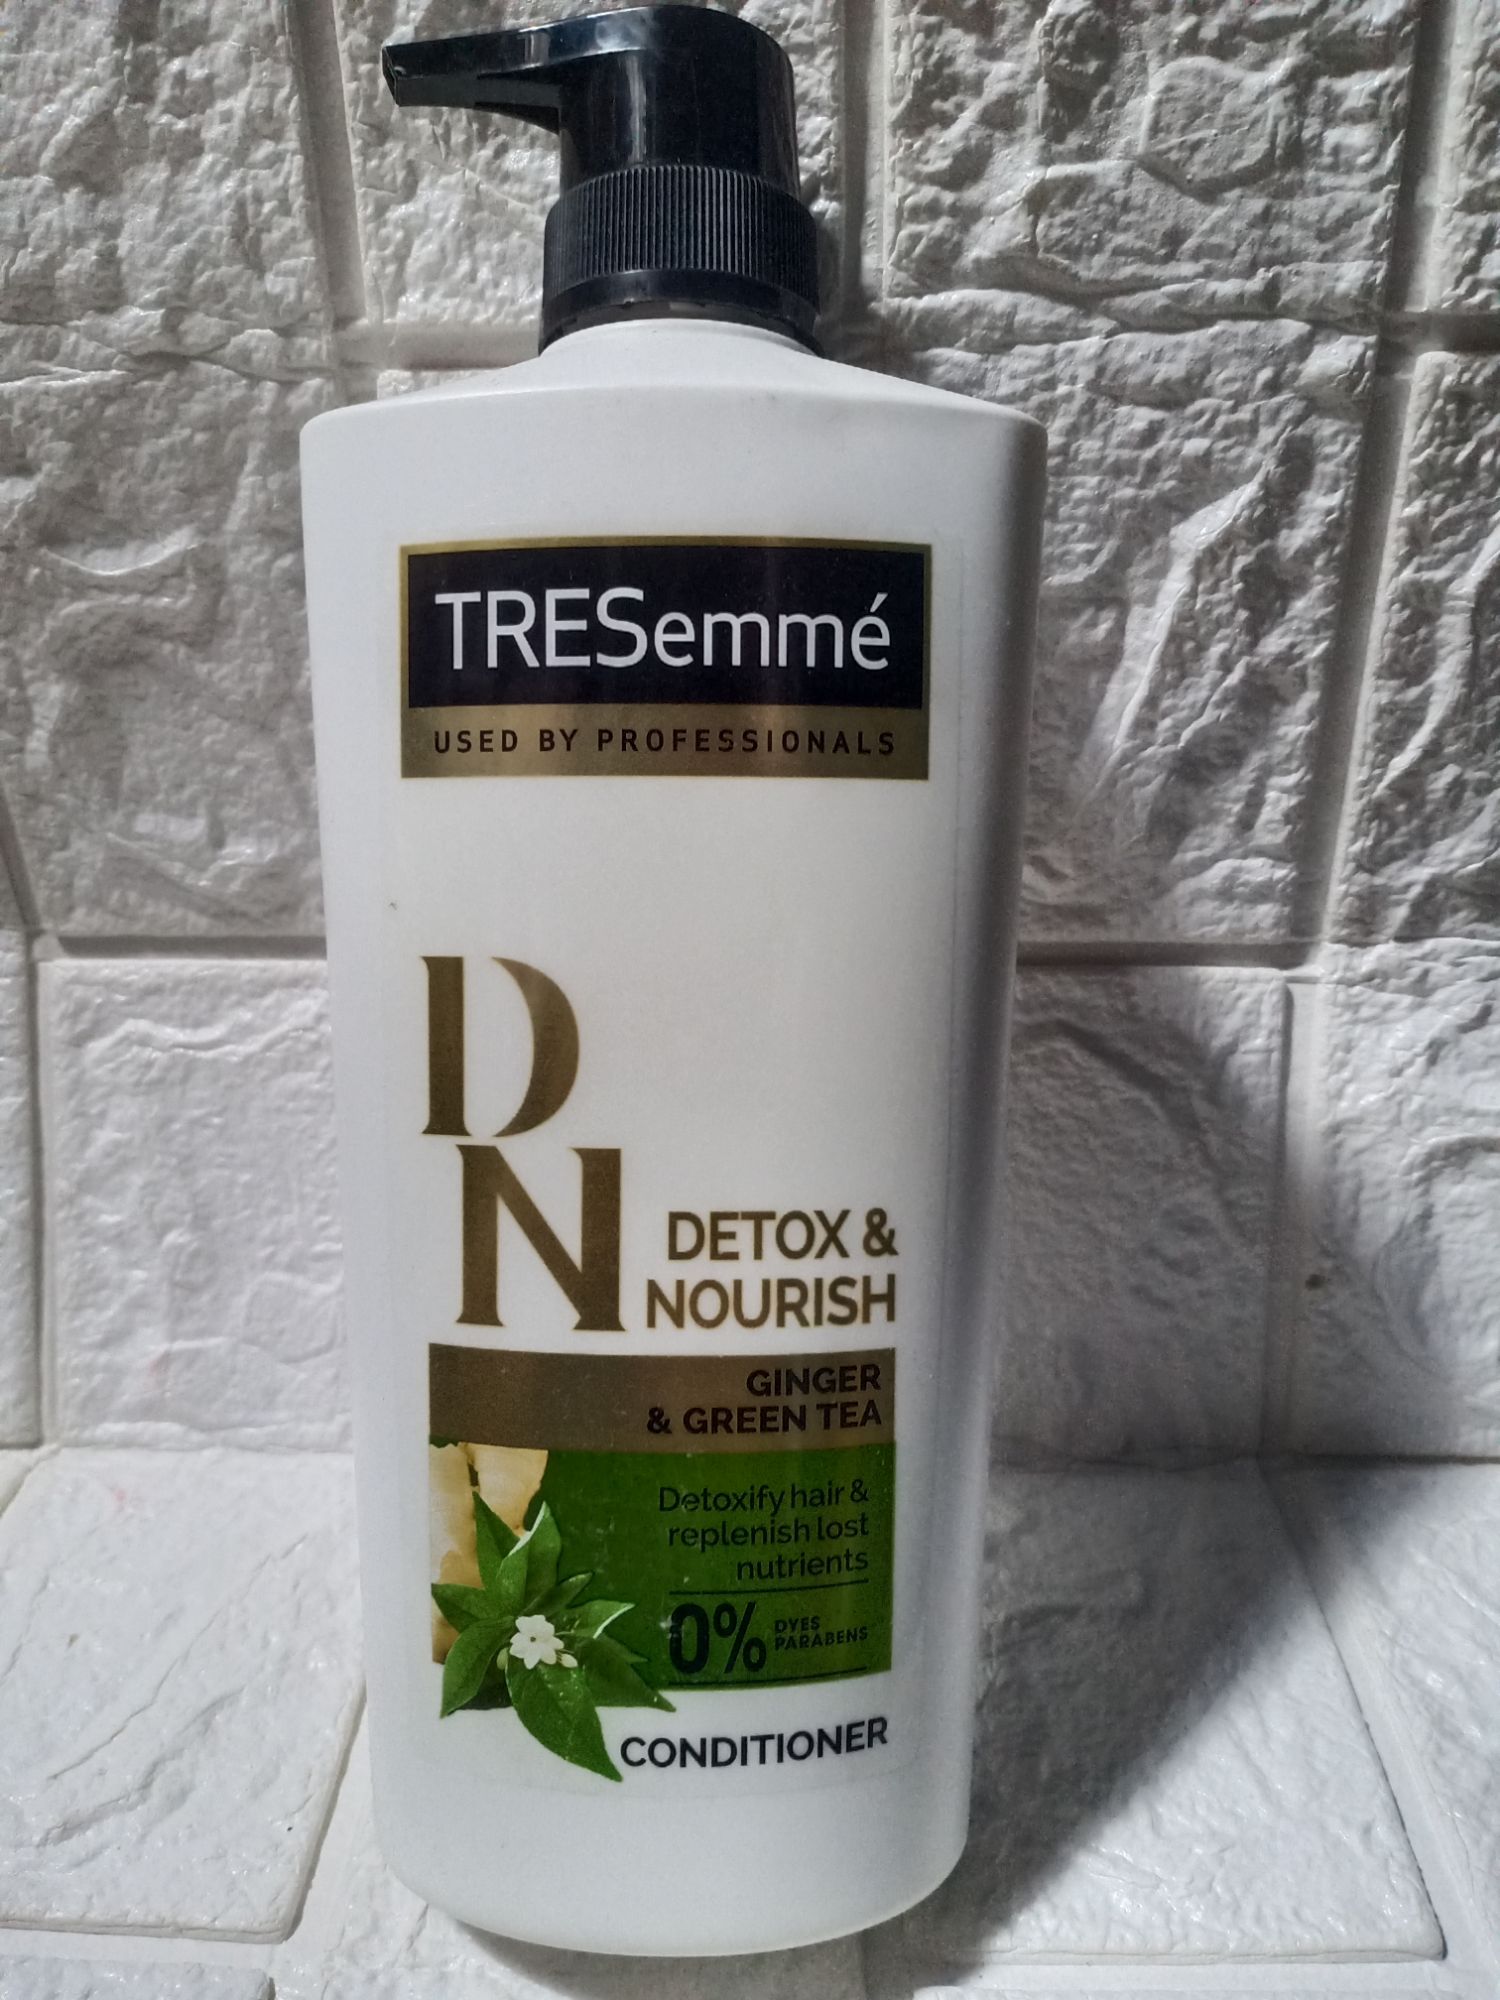 Sale Tresemme Detox And Nourish Ginger And Green Tea Conditioner 620ml